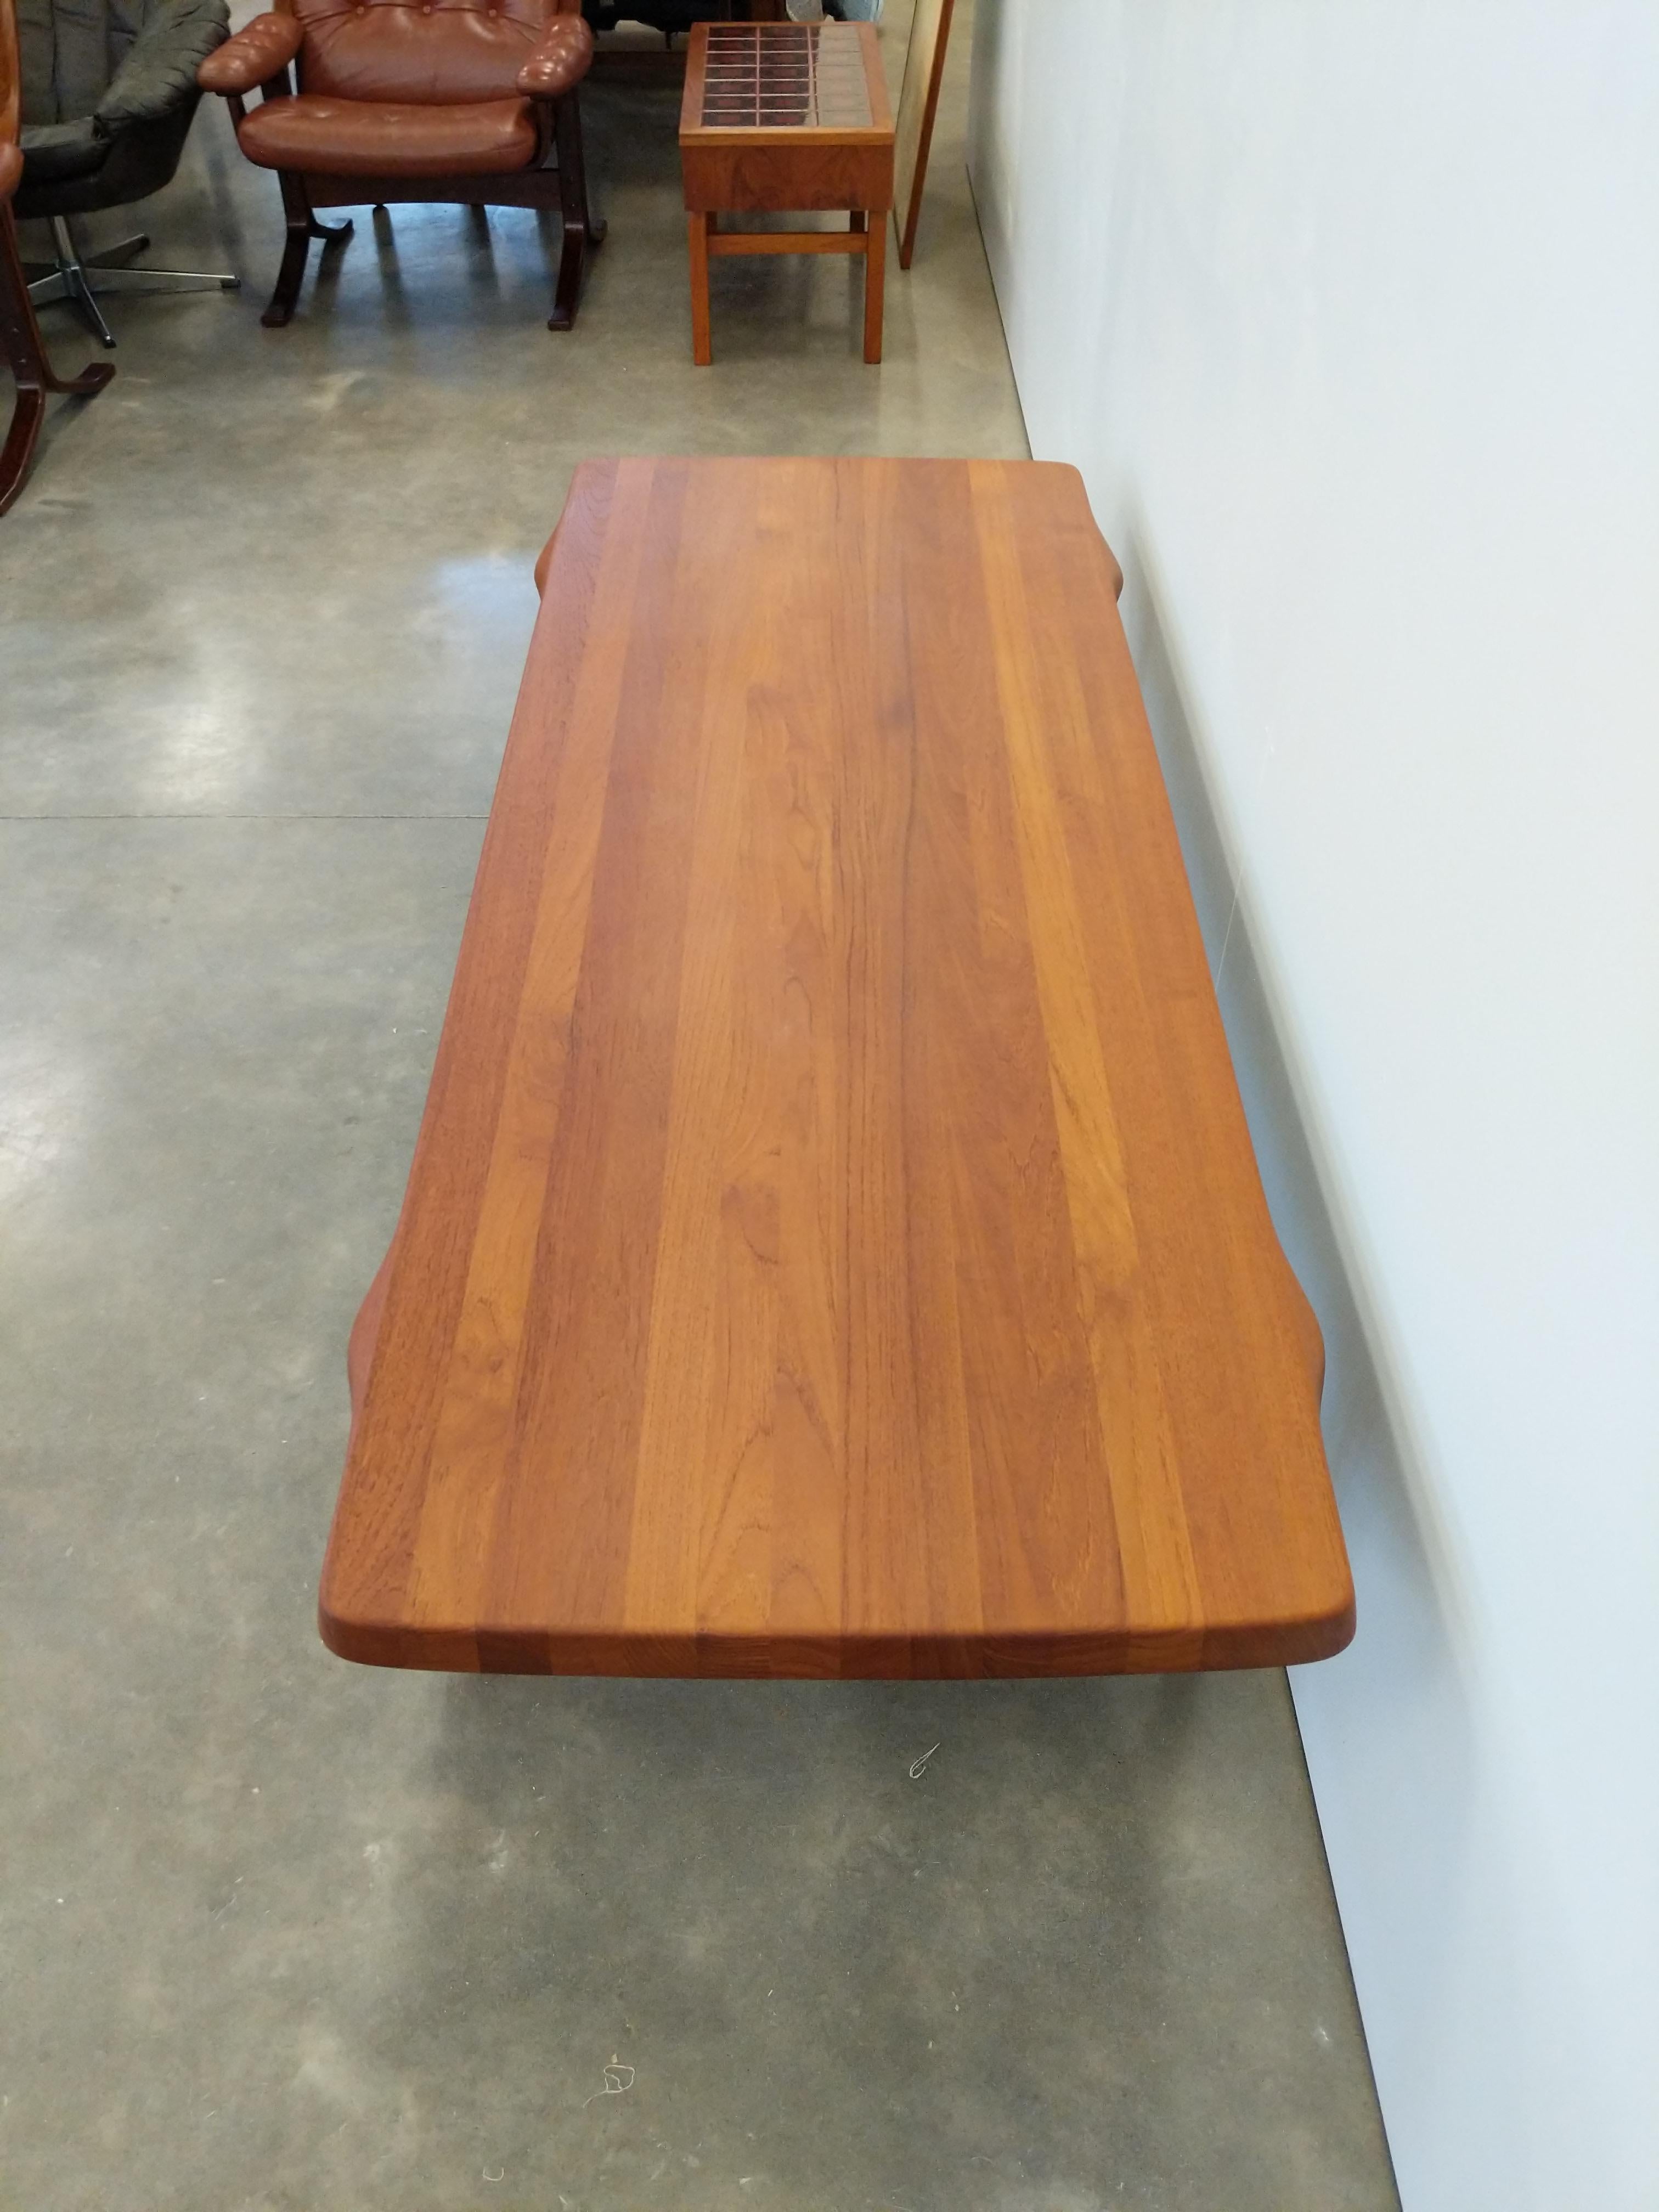 Vintage Danish Mid Century Modern Teak Coffee Table In Good Condition For Sale In Gardiner, NY